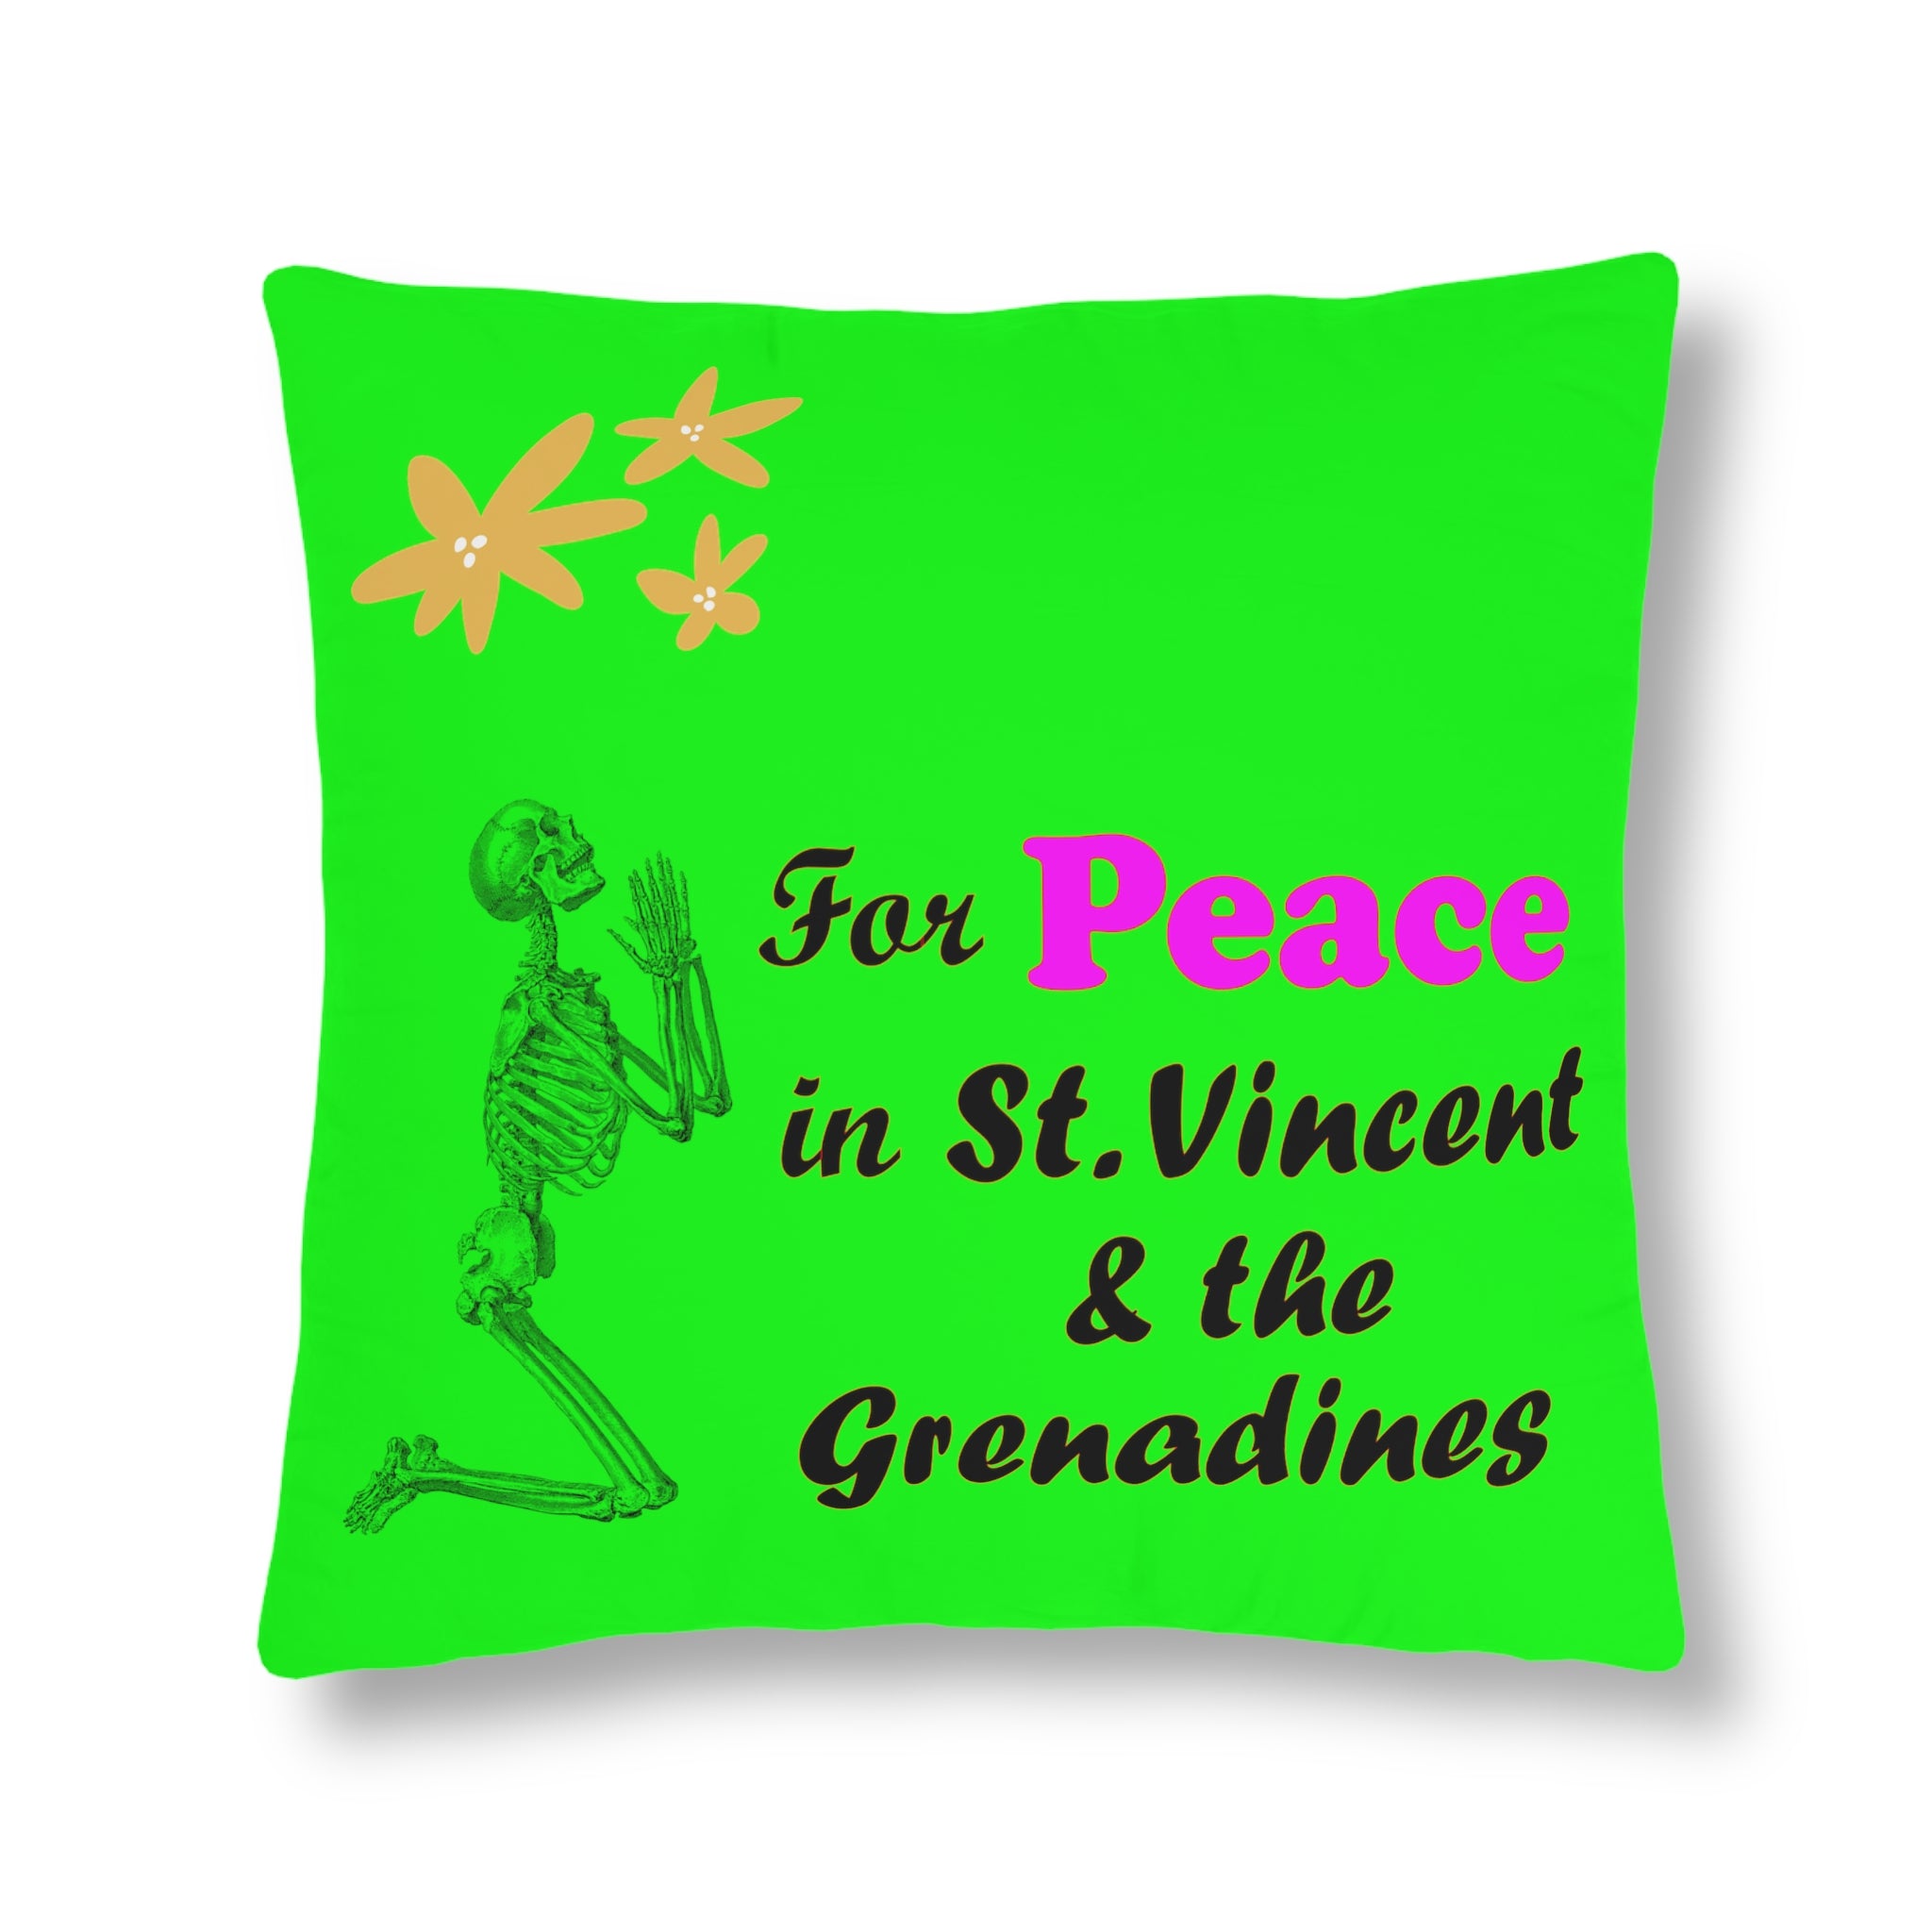 St. Vincent and the Grenadines Pray For Peace Waterproof Pillows